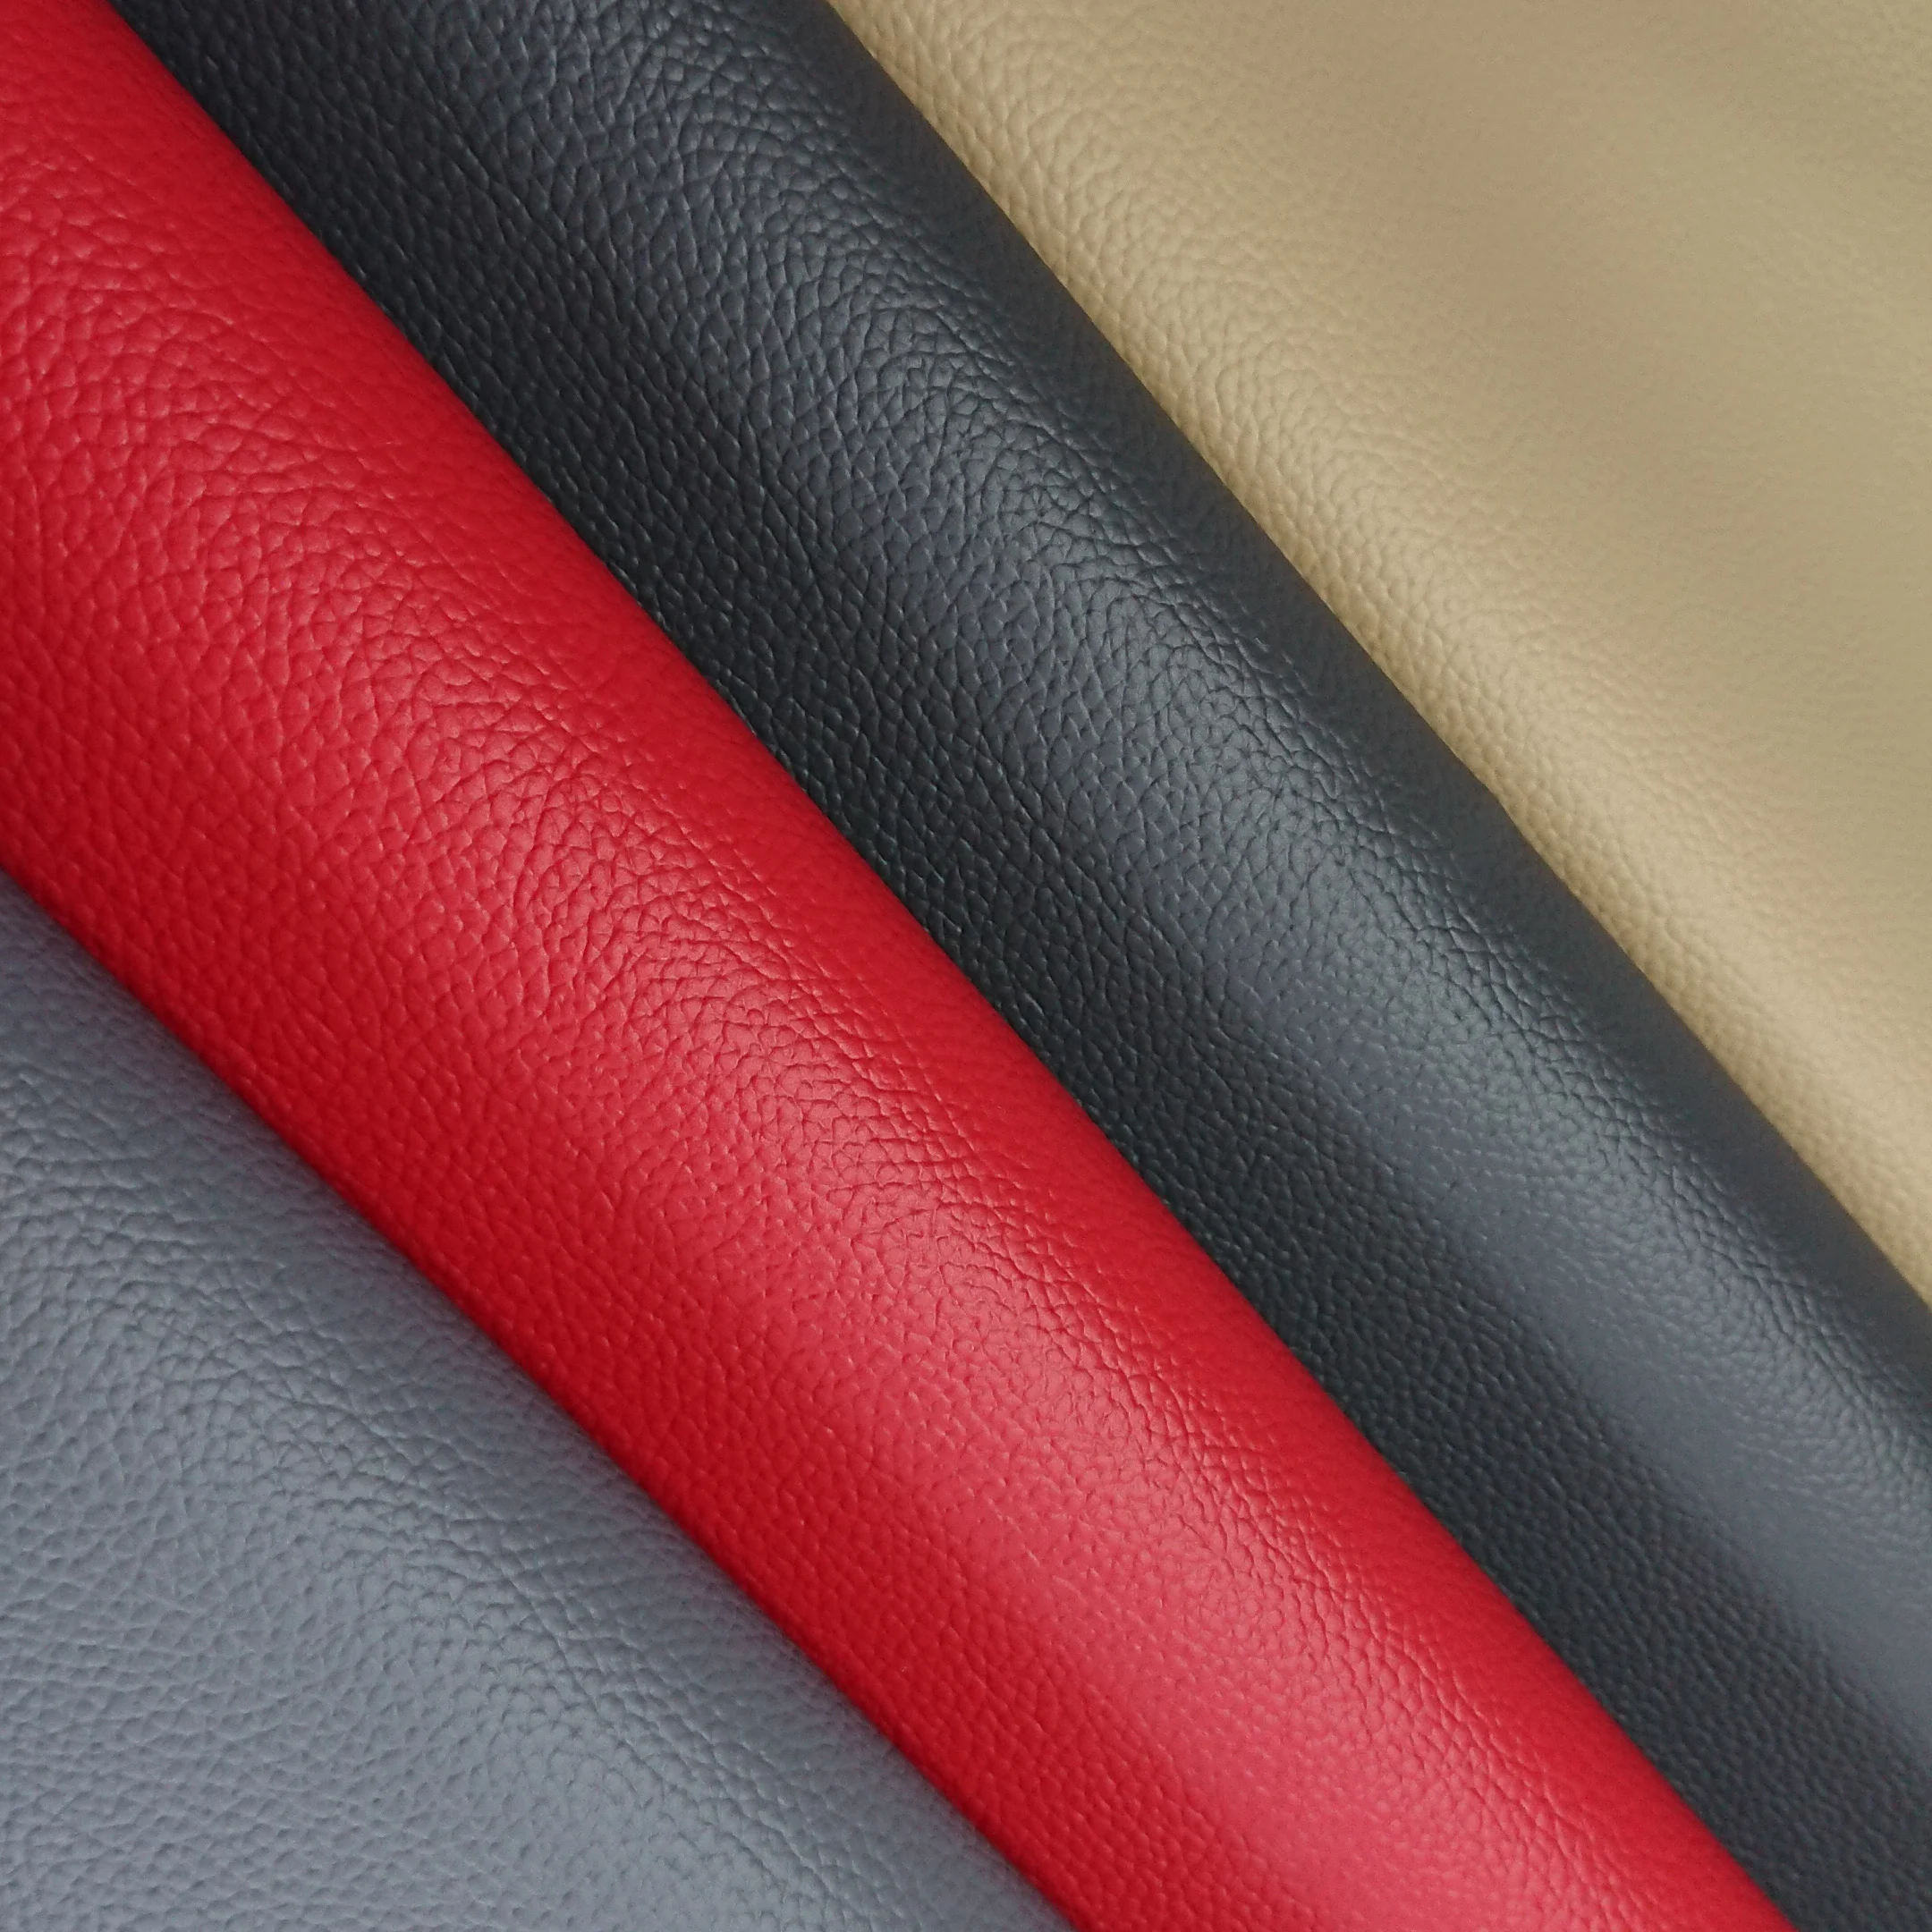 faux leather manufacturer